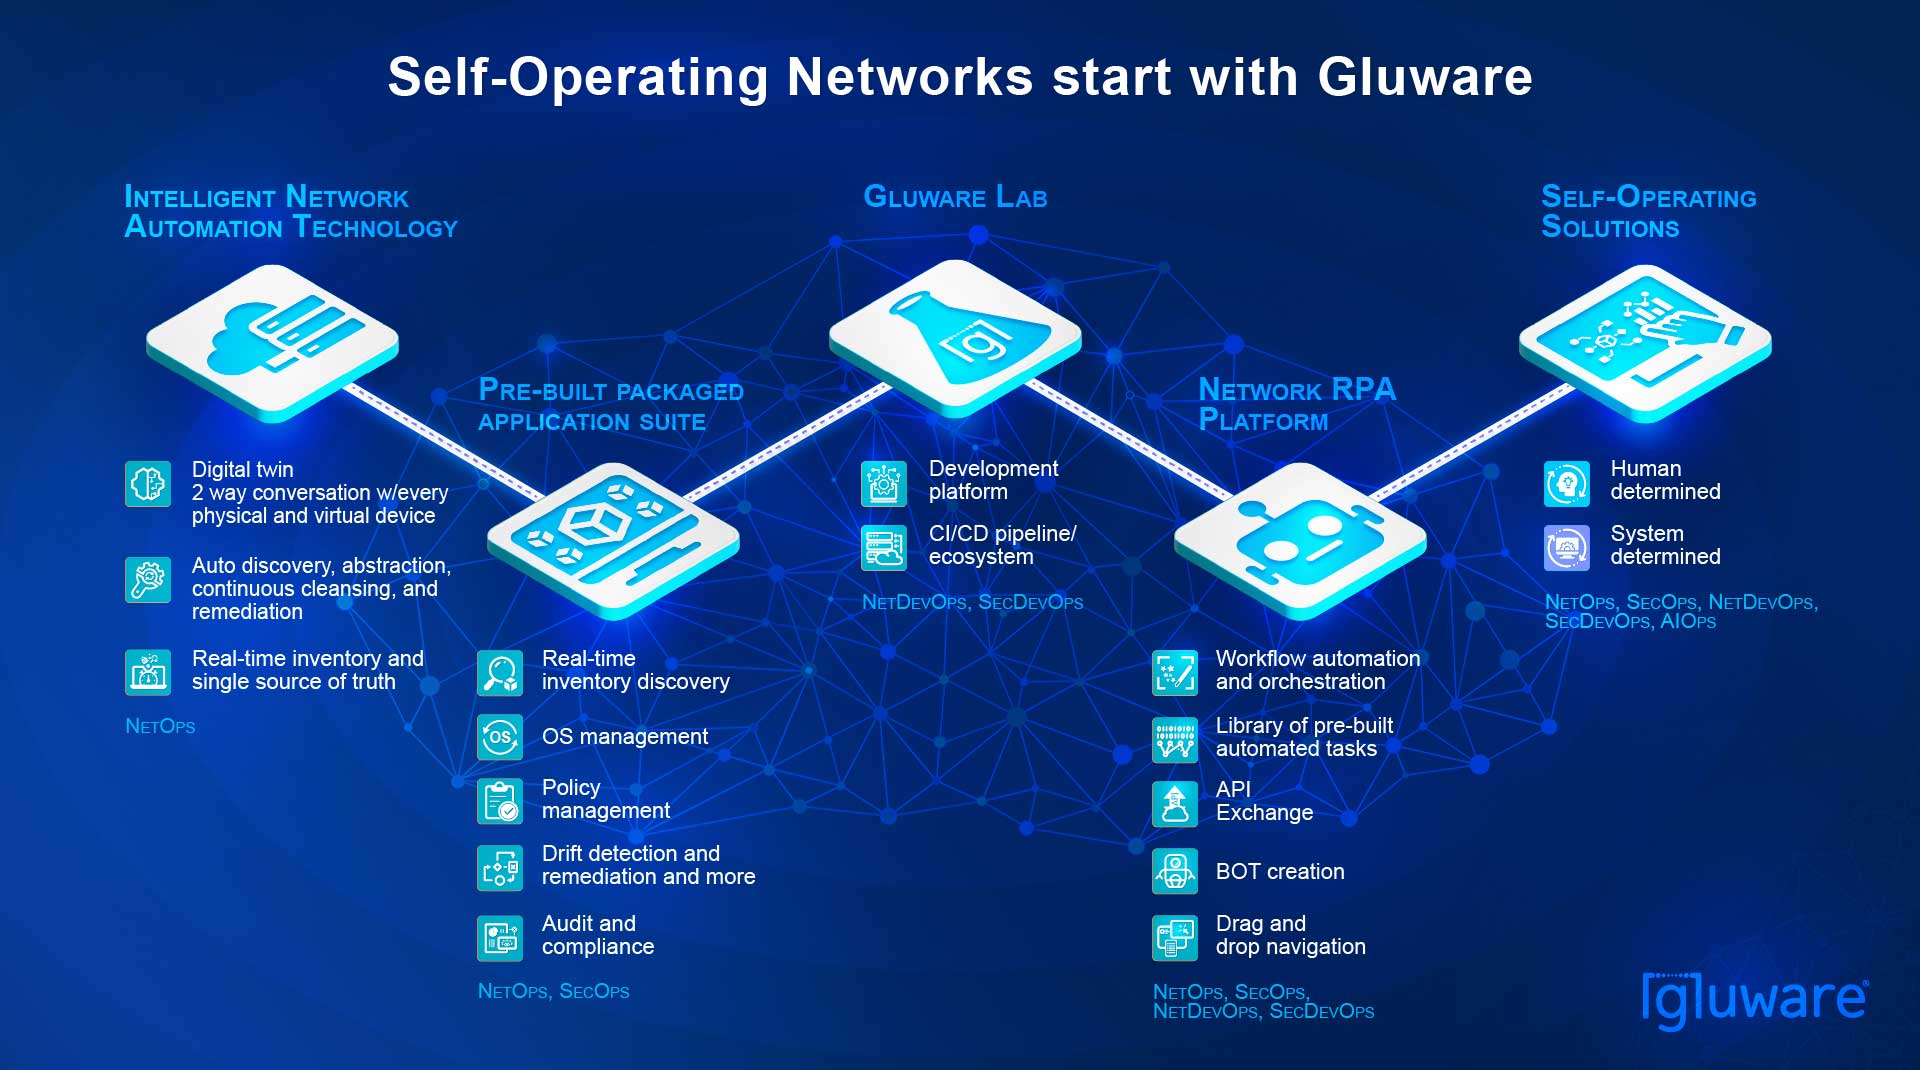 Self-Operating Networks Start with Gluware